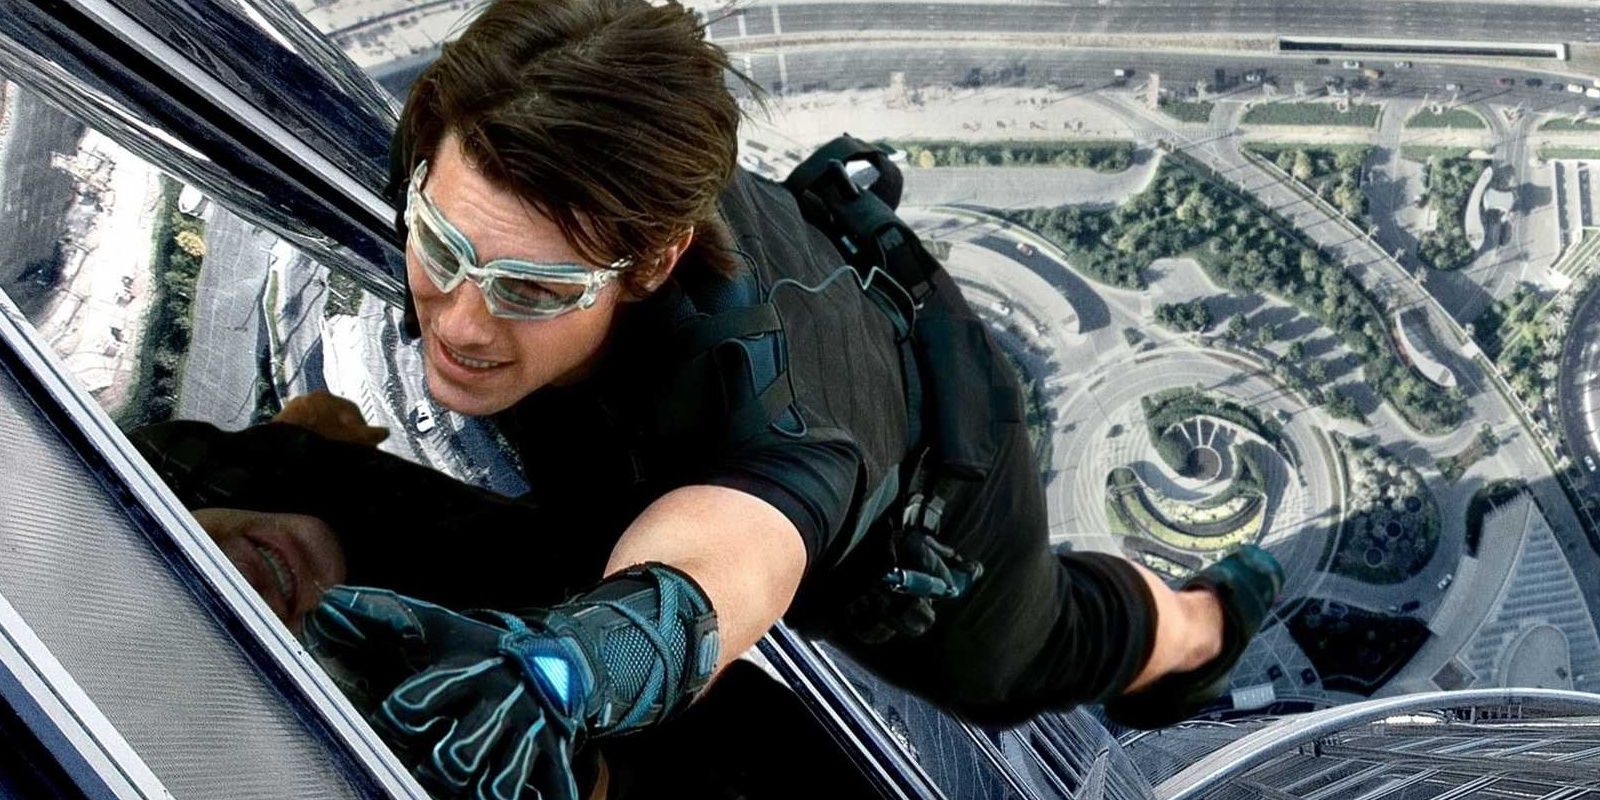 Where To Watch Every Mission Impossible Movie Online NEXT The MyersBriggs® Personality Types Of Mission Impossible Characters